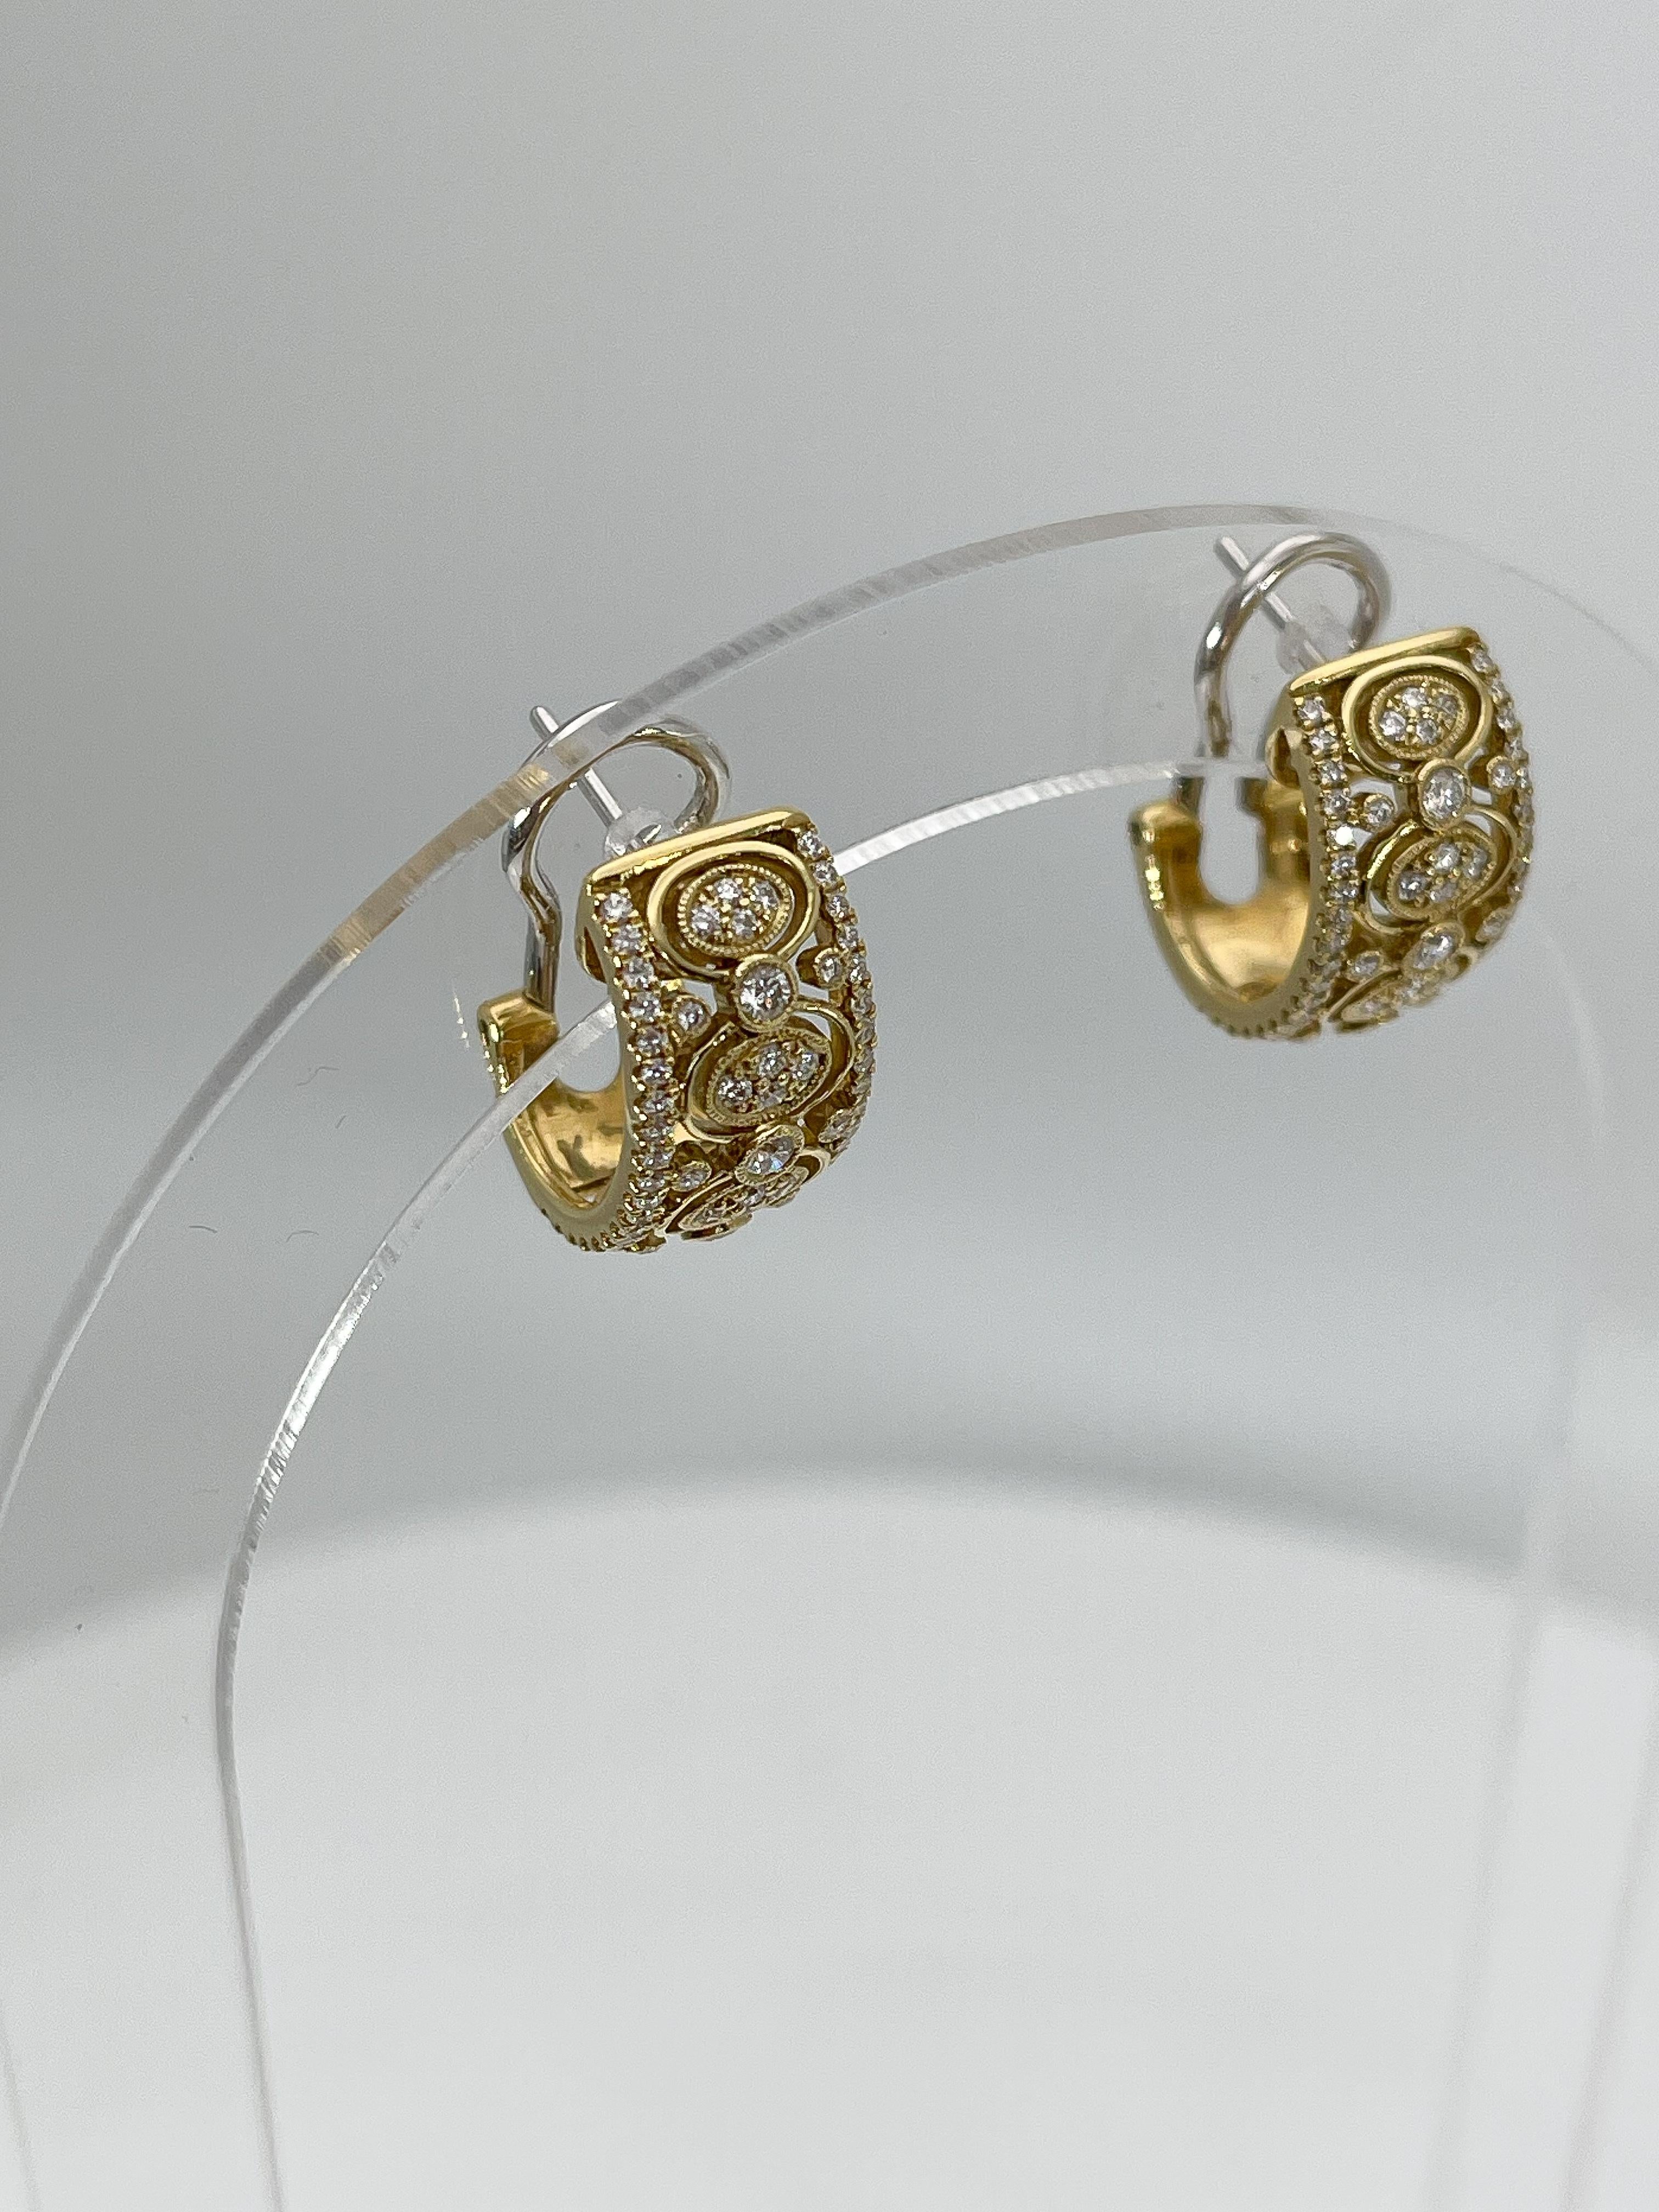 Simon G 18K Yellow Gold .70 CTW Diamond Fashion Earrings In Excellent Condition For Sale In Stuart, FL